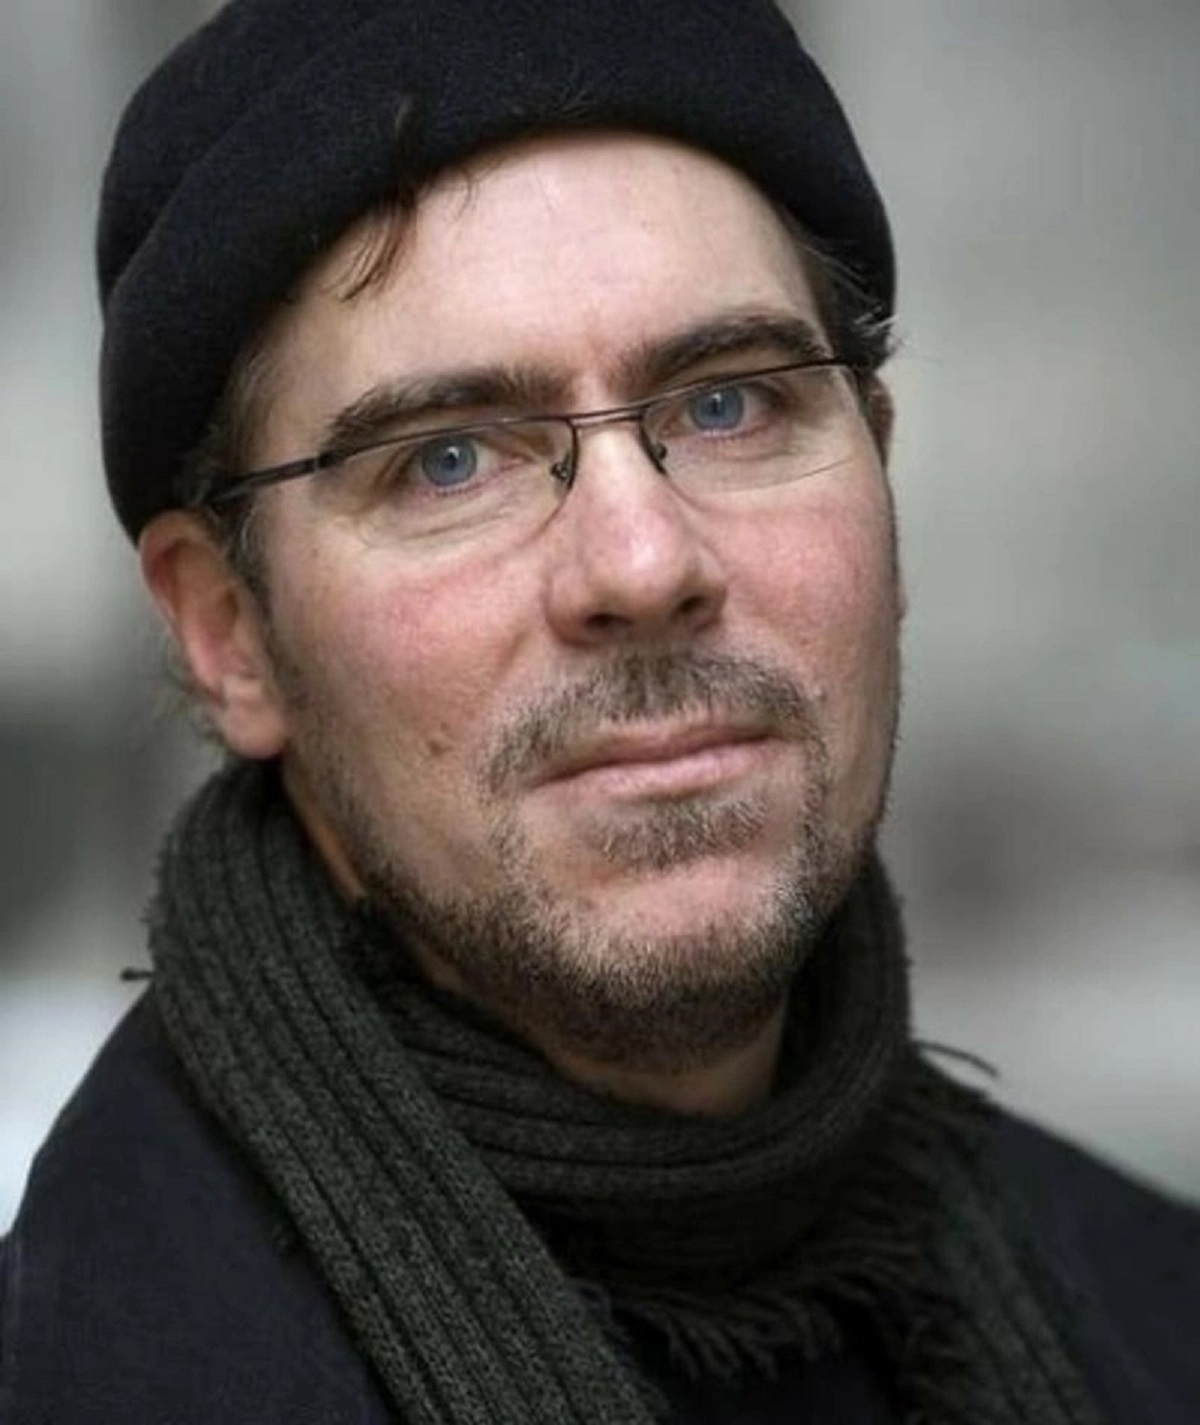 Swedish filmmaker Daniel Lind Lagerlöf, known for directing and producing, was scouting for his next film in October 2011 near Tanumshede. It's speculated that large waves in the Tjurpannan nature reserve knocked him off his feet, and he's presumed dead, with no witnesses present.